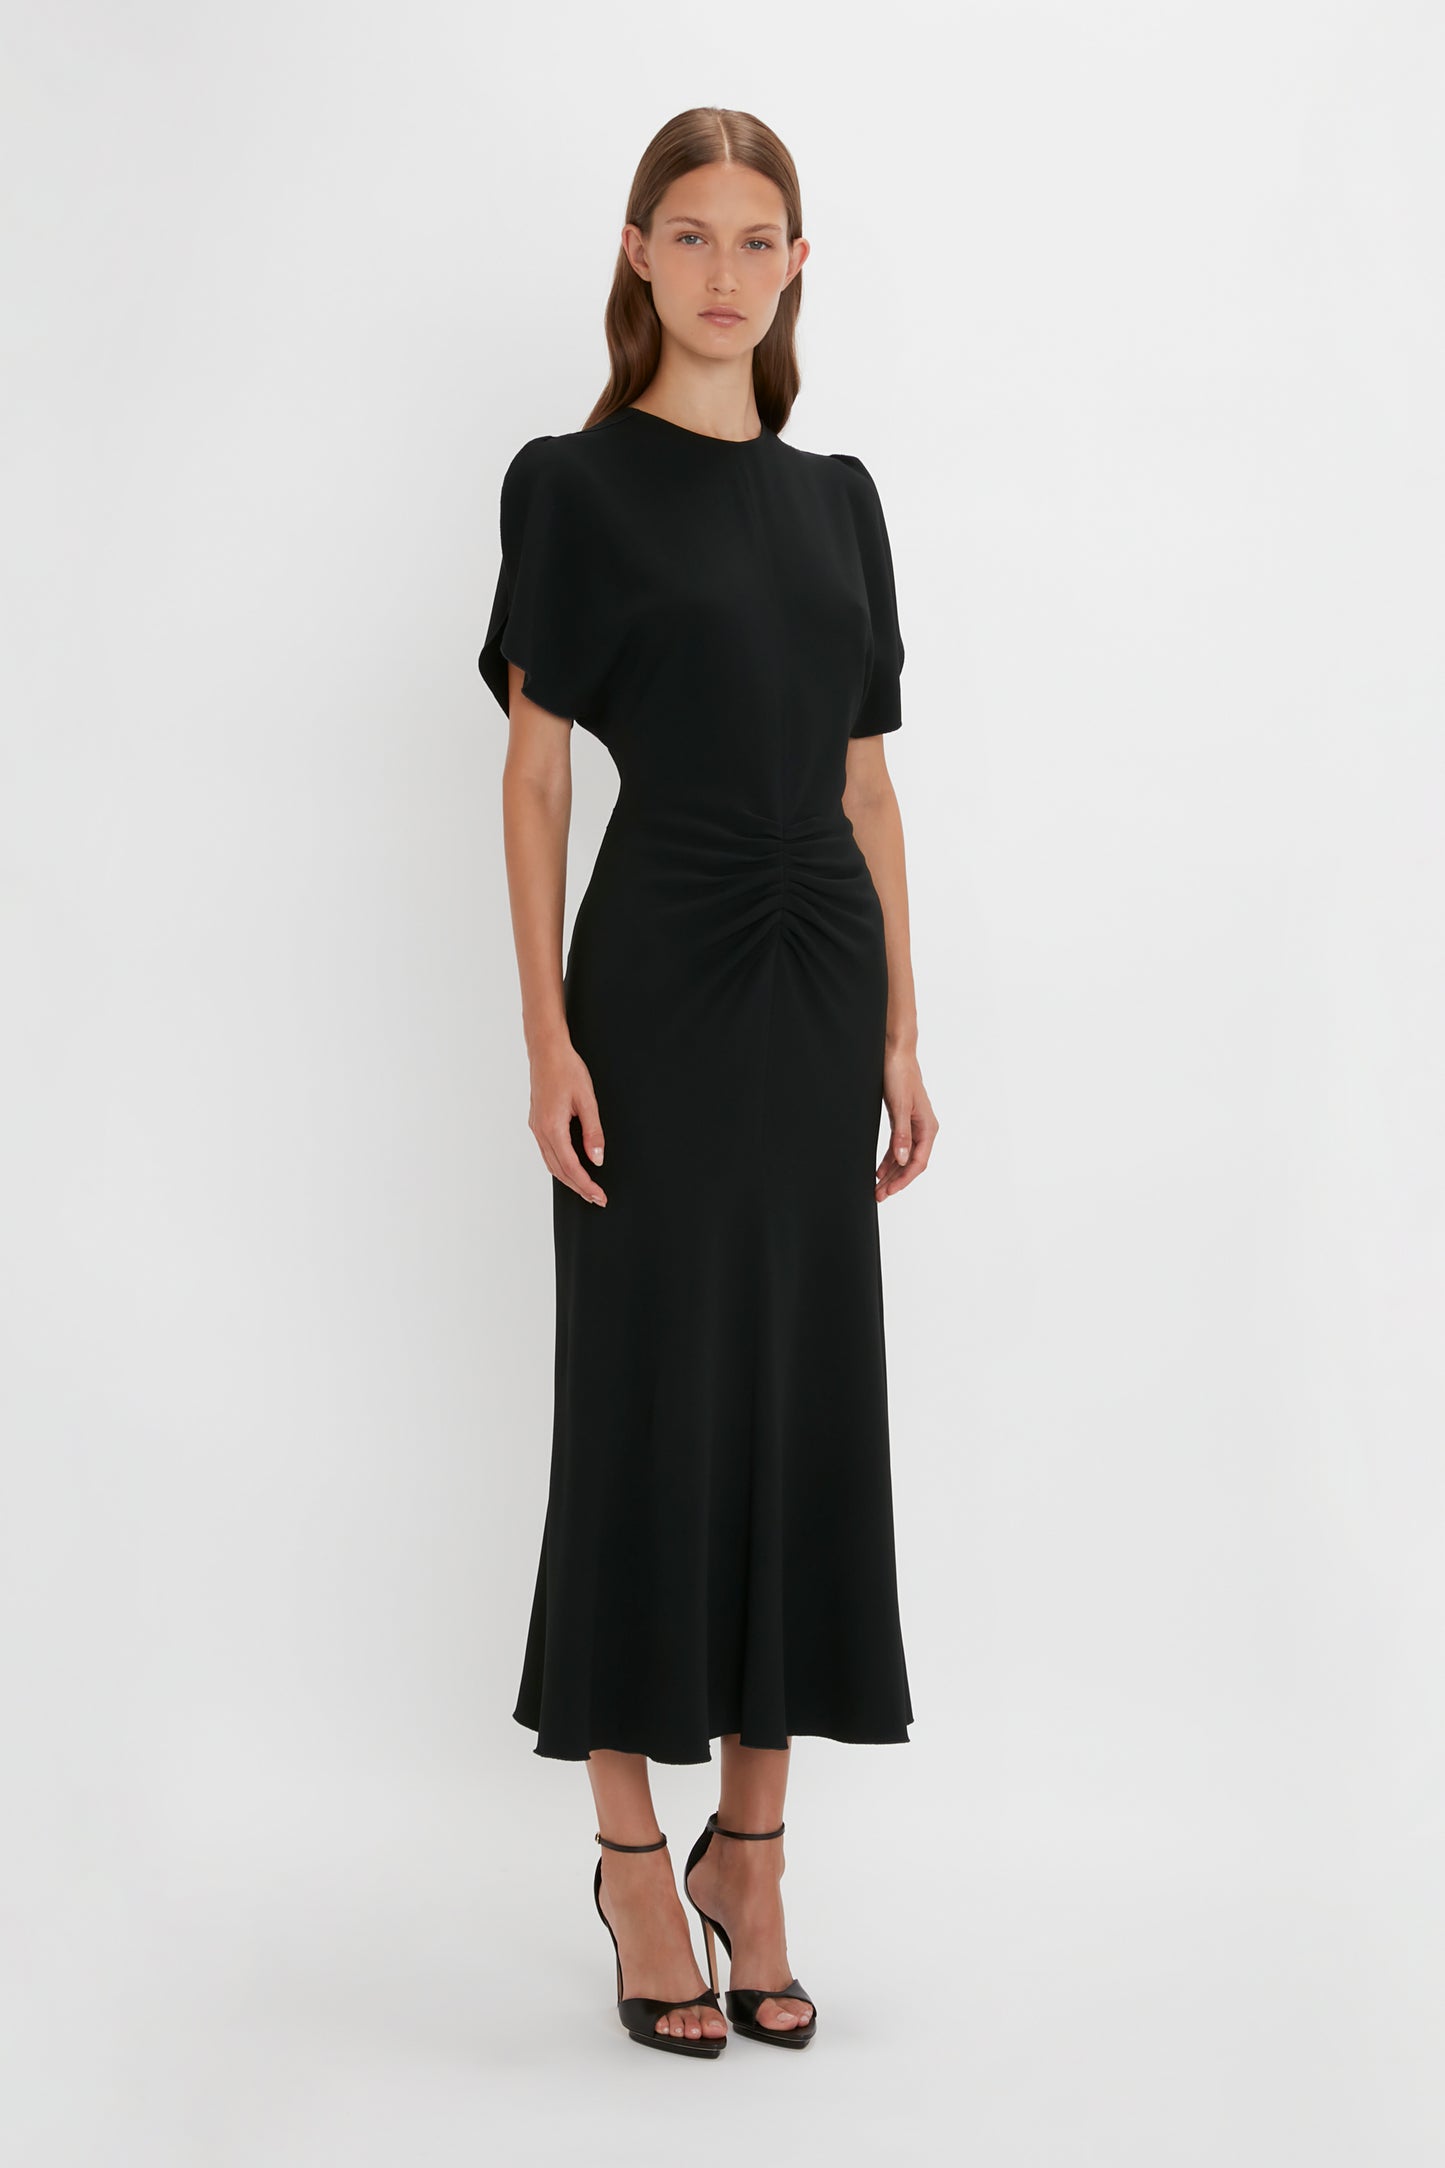 Woman in a Victoria Beckham black Gathered Waist Midi Dress with short sleeves and cinched waist detail, standing against a plain white background.